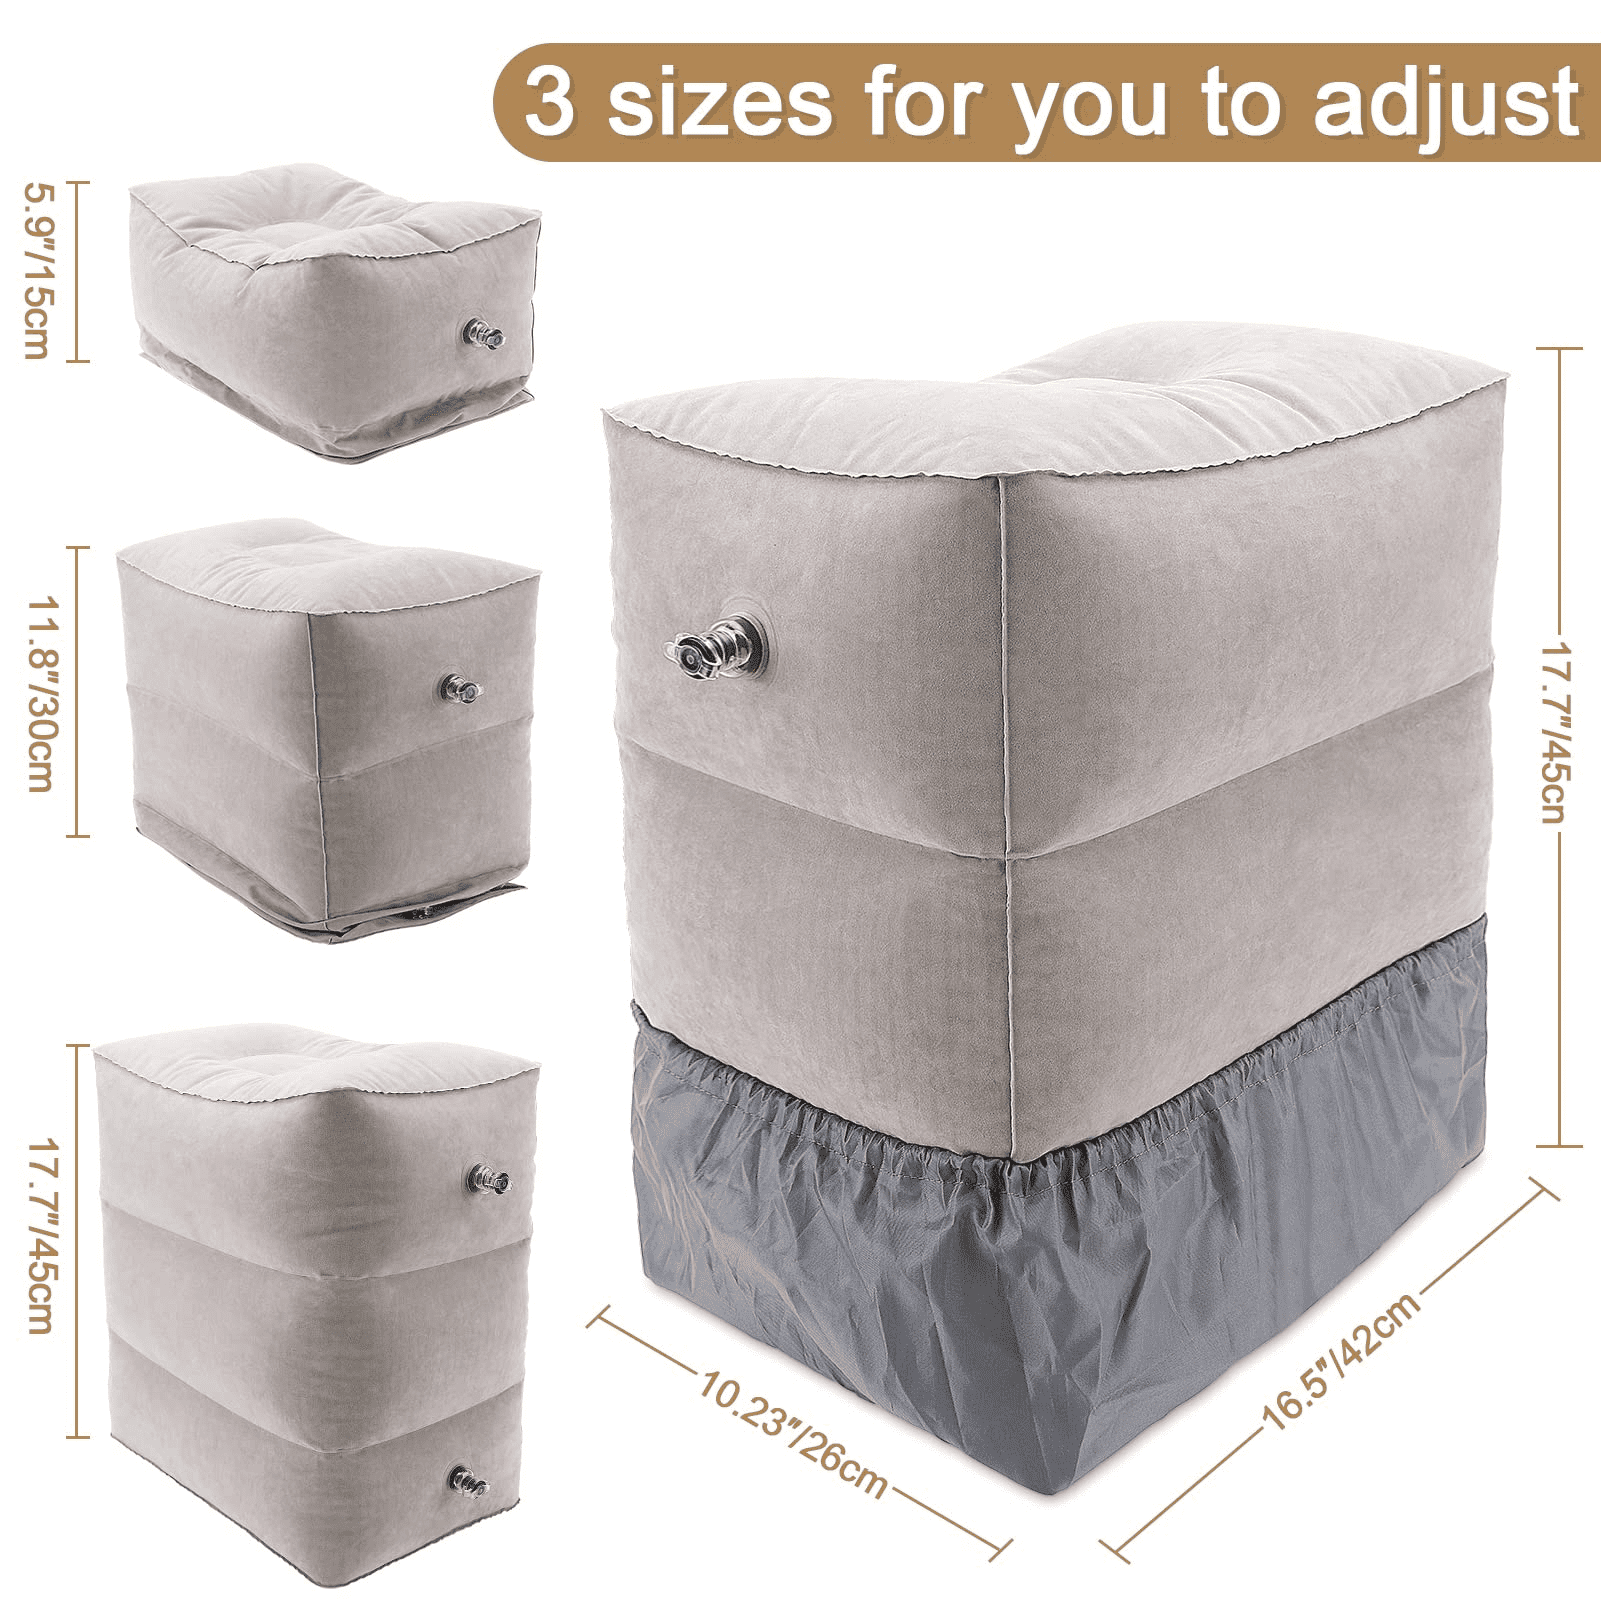 Gray color, inflation tools not included. Travel Footrest Pillow -  Inflatable Footrest for Kids Aircraft Bed Sleeping Flight Leg Pillow,  Inflatable